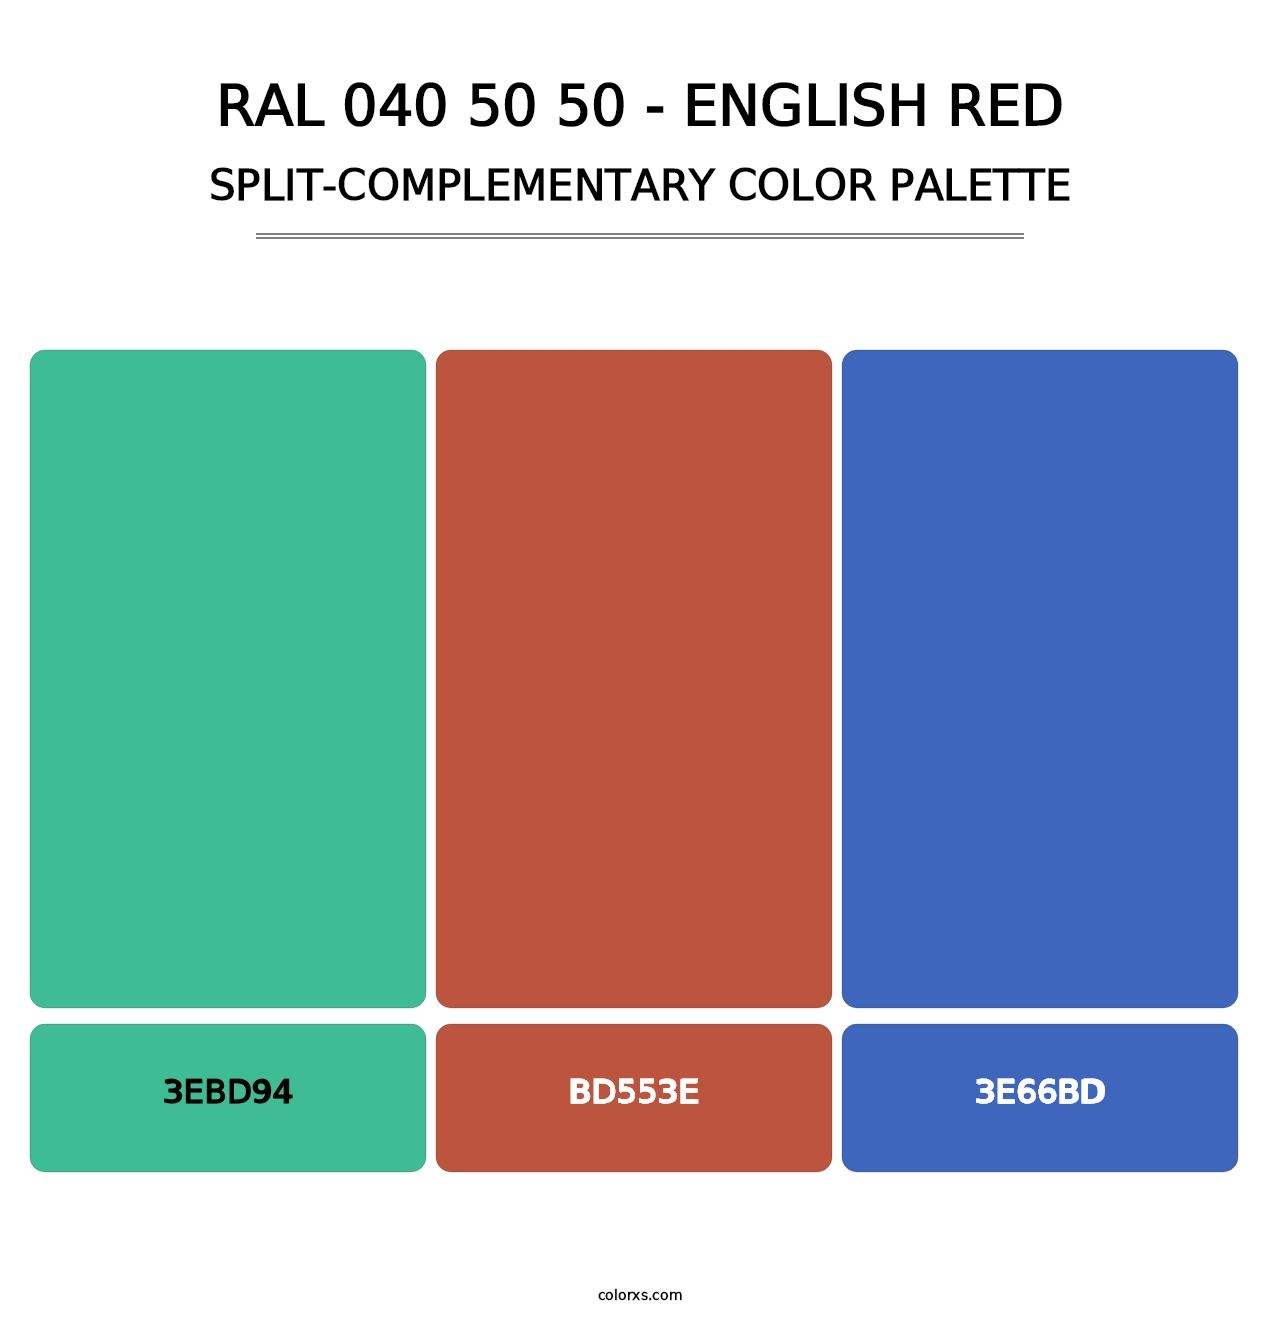 RAL 040 50 50 - English Red - Split-Complementary Color Palette